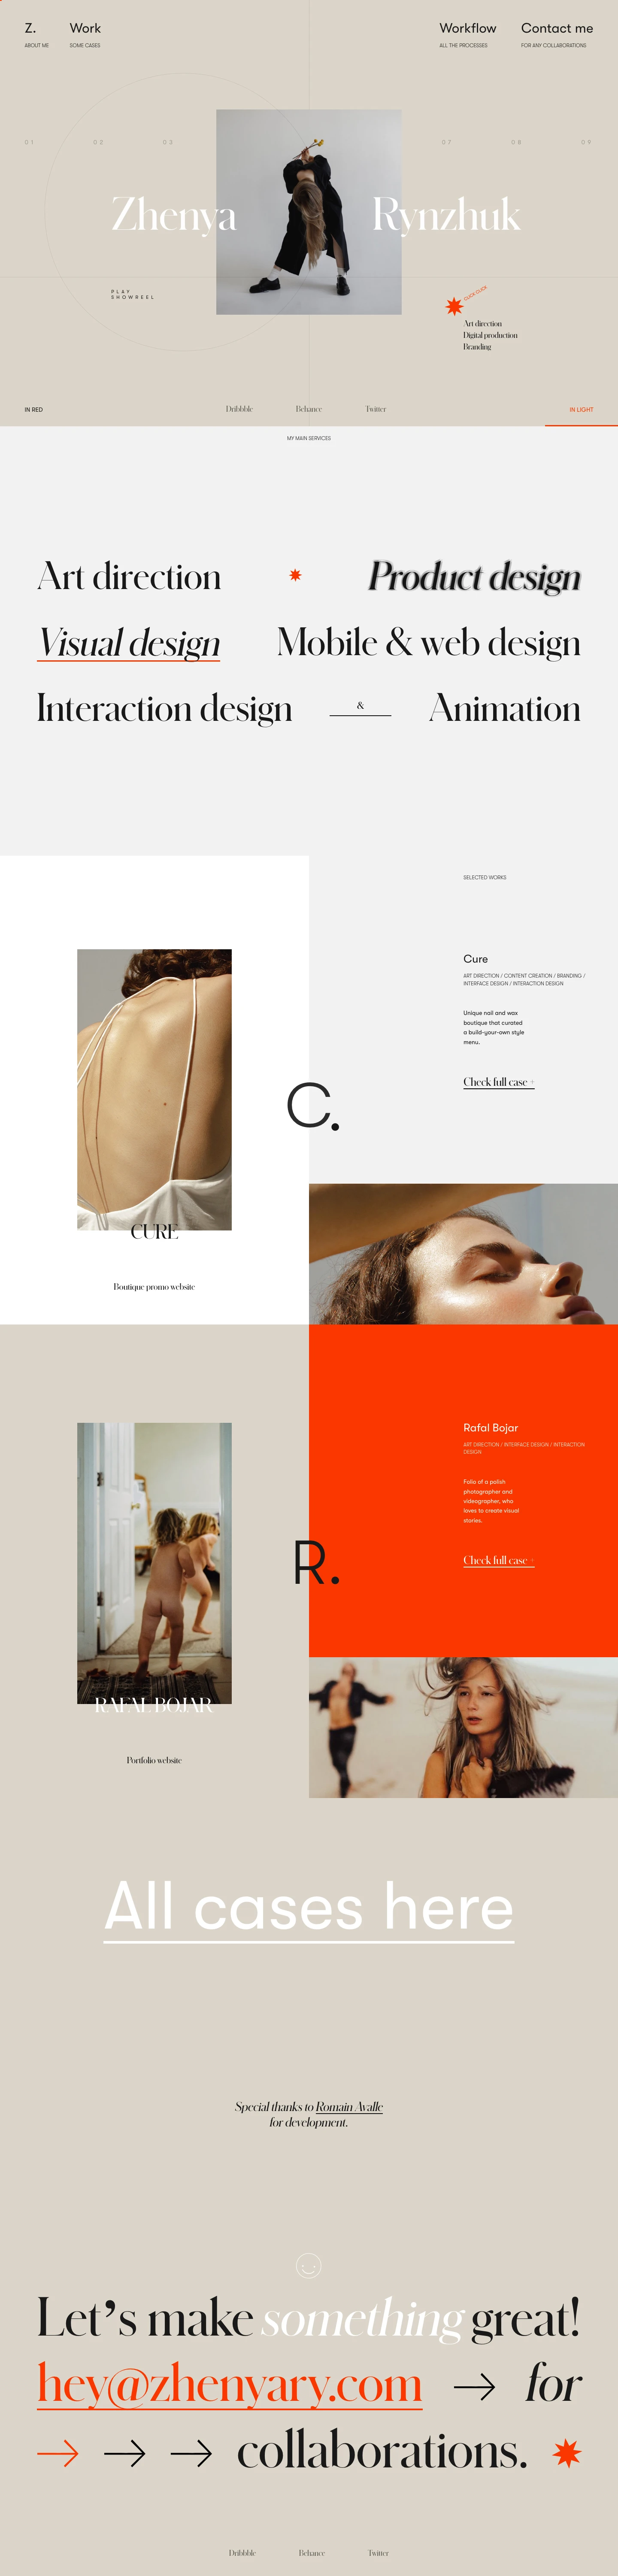 Zhenya Rynzhuk Landing Page Example: Portfolio of Zhenya Rynzhuk, award-winning art director. Areas of expertise include Product & Visual design, Mobile & Web projects, Branding, Typography, and Animations.